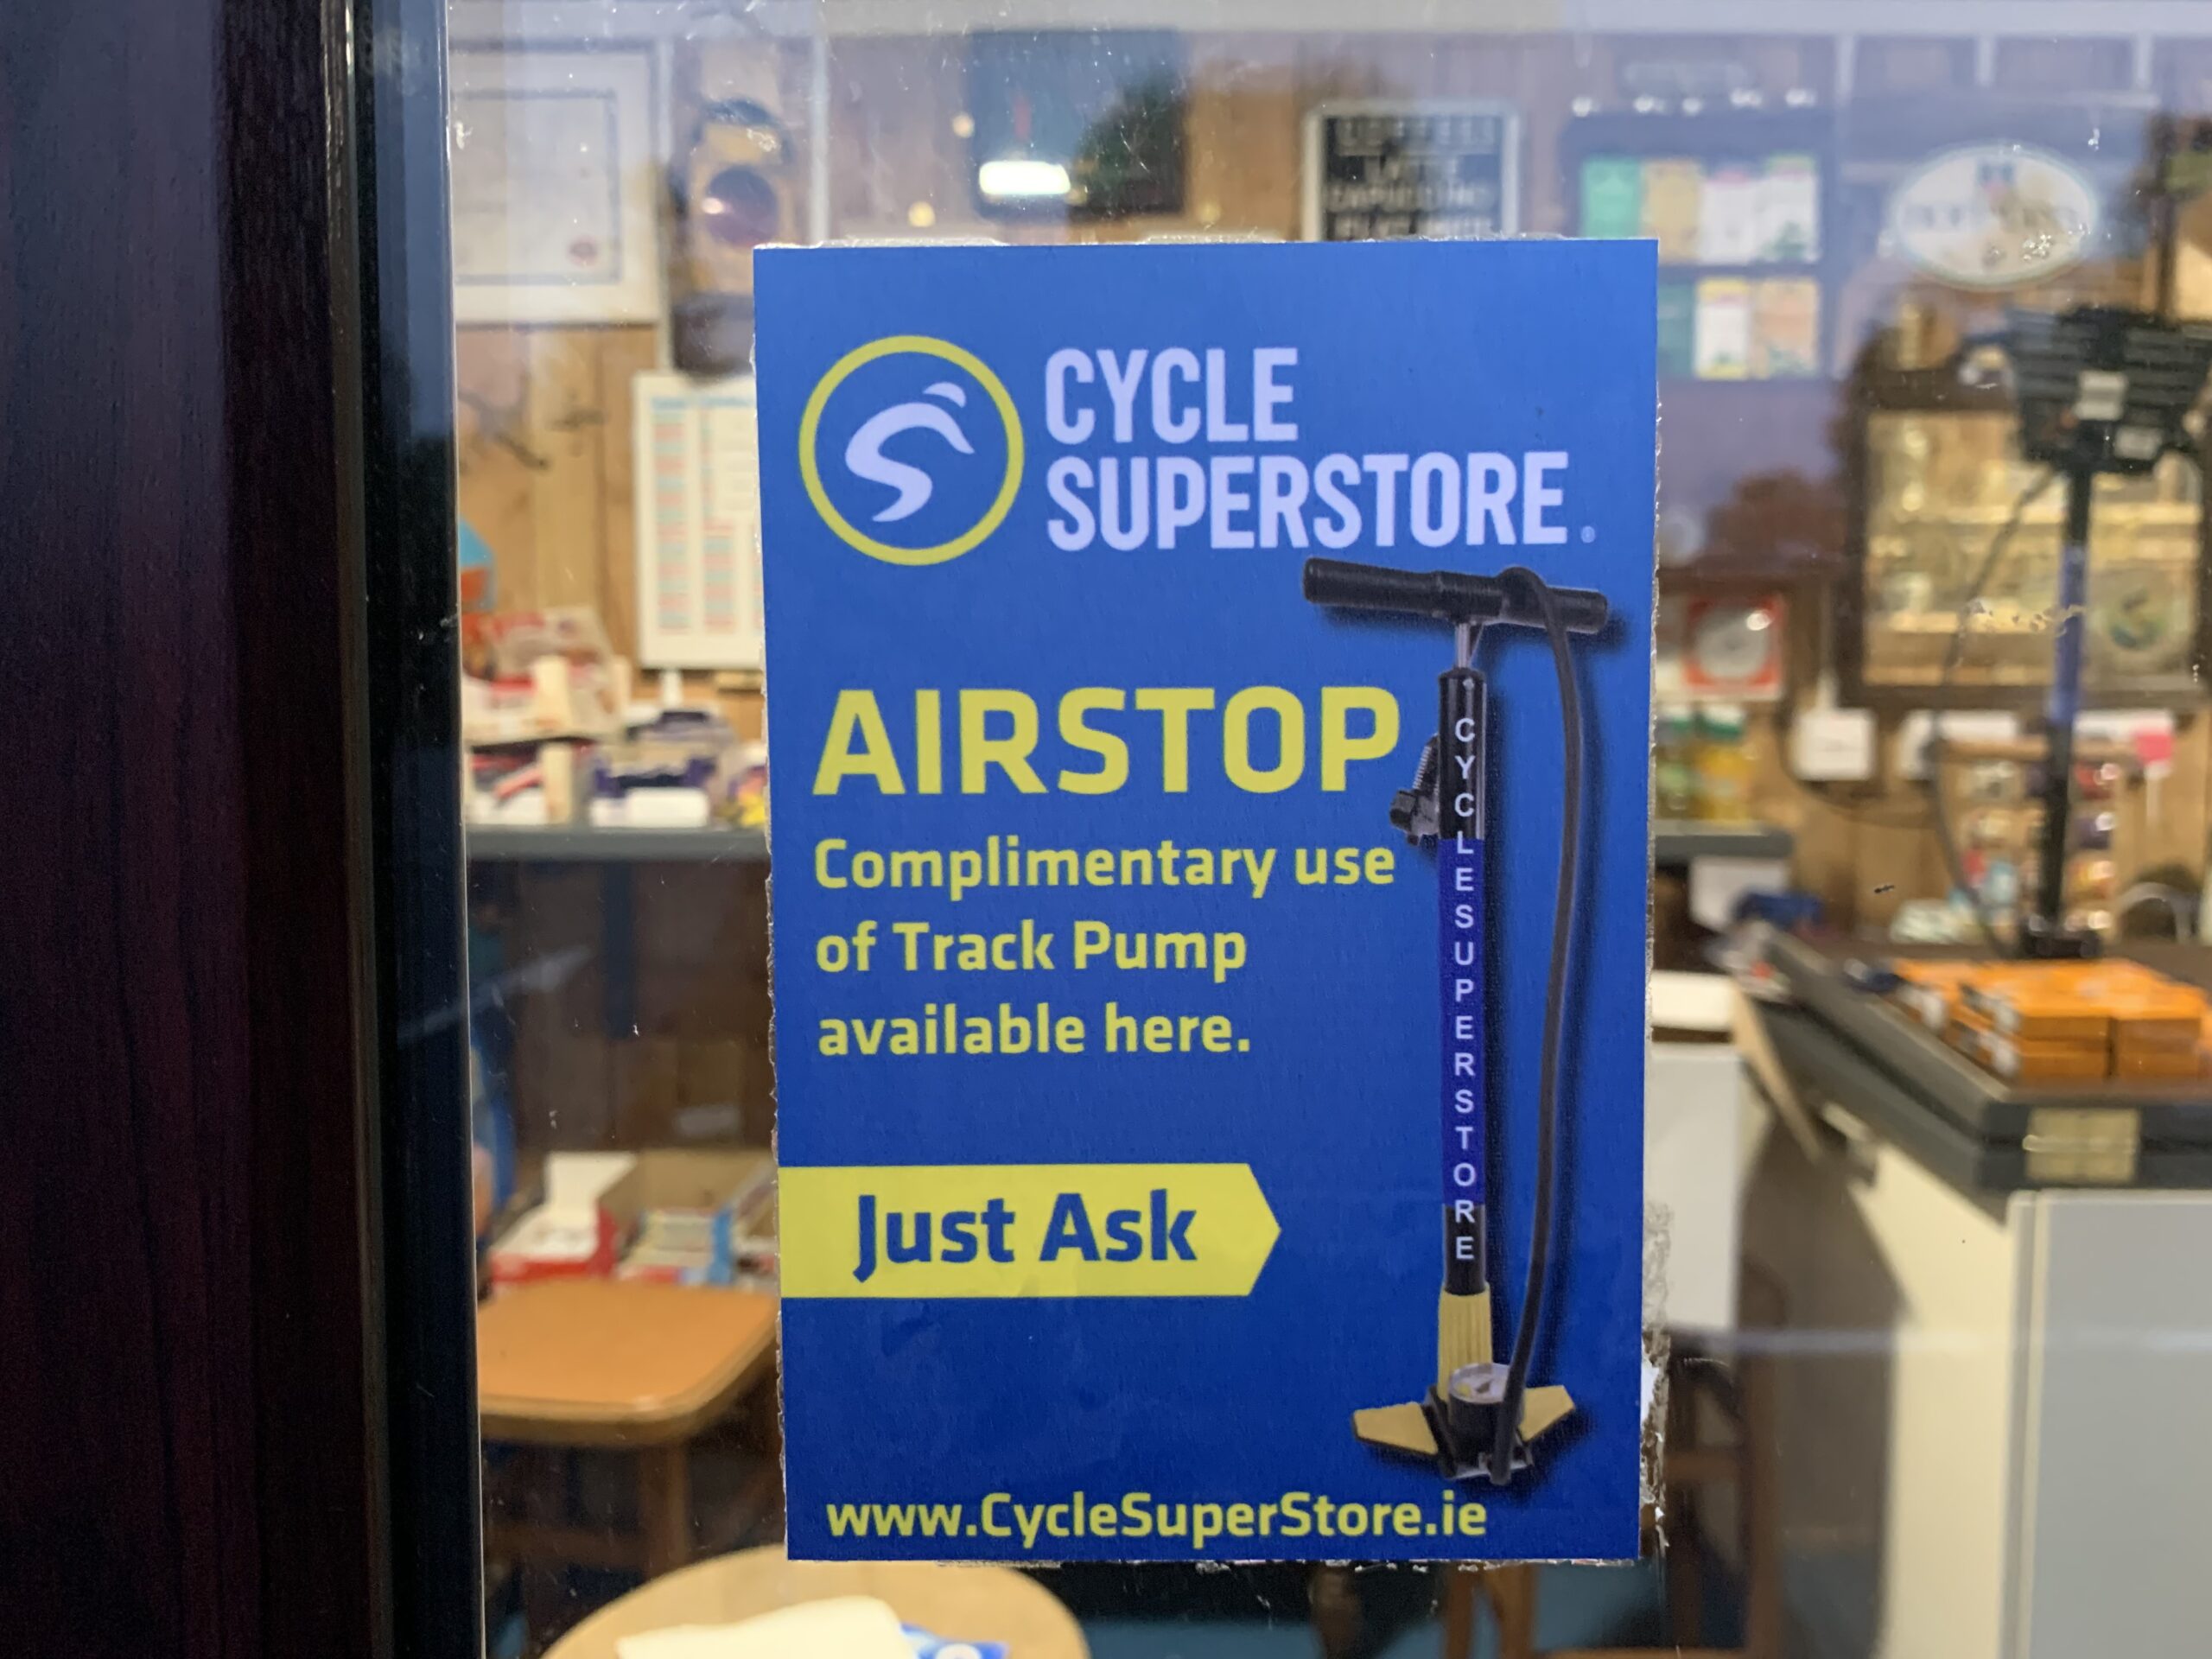 The Club signs up to ‘Air Stop Cafes’ with The Cycle SuperStore